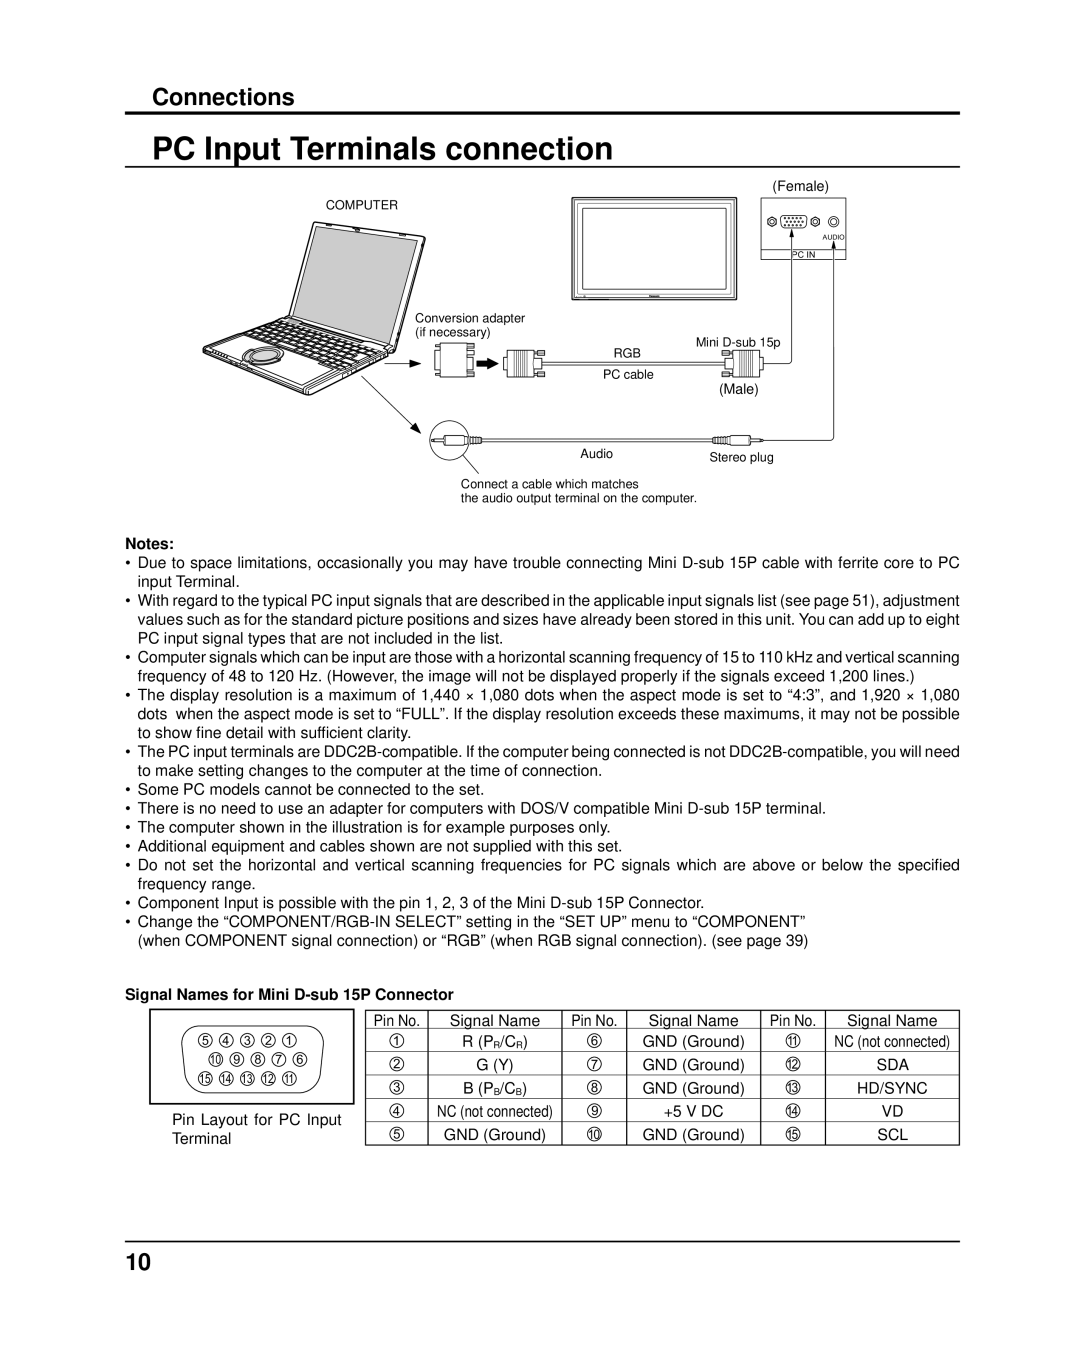 Panasonic TH-50PF11UK, TH-65PF11UK PC Input Terminals connection, Connections, Signal Names for Mini D-sub 15P Connector 